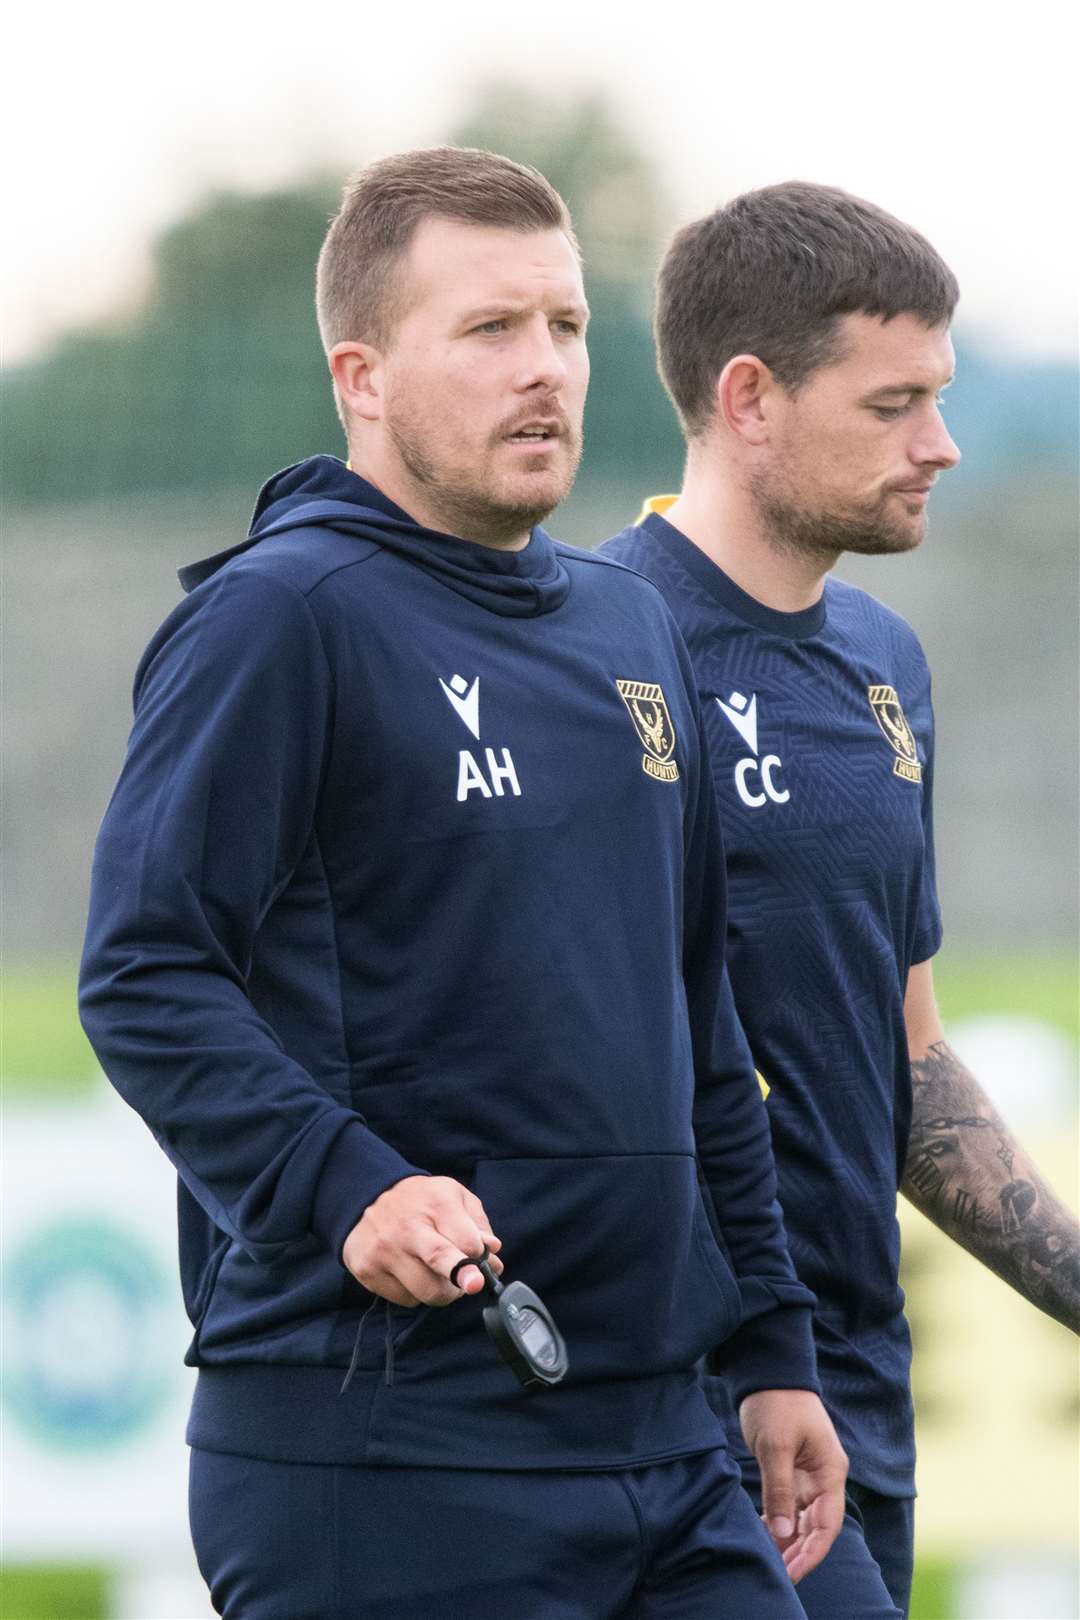 Colin Charlesworth (right) alongside Allan Hale, the man he is replacing as Huntly boss. Picture: Daniel Forsyth